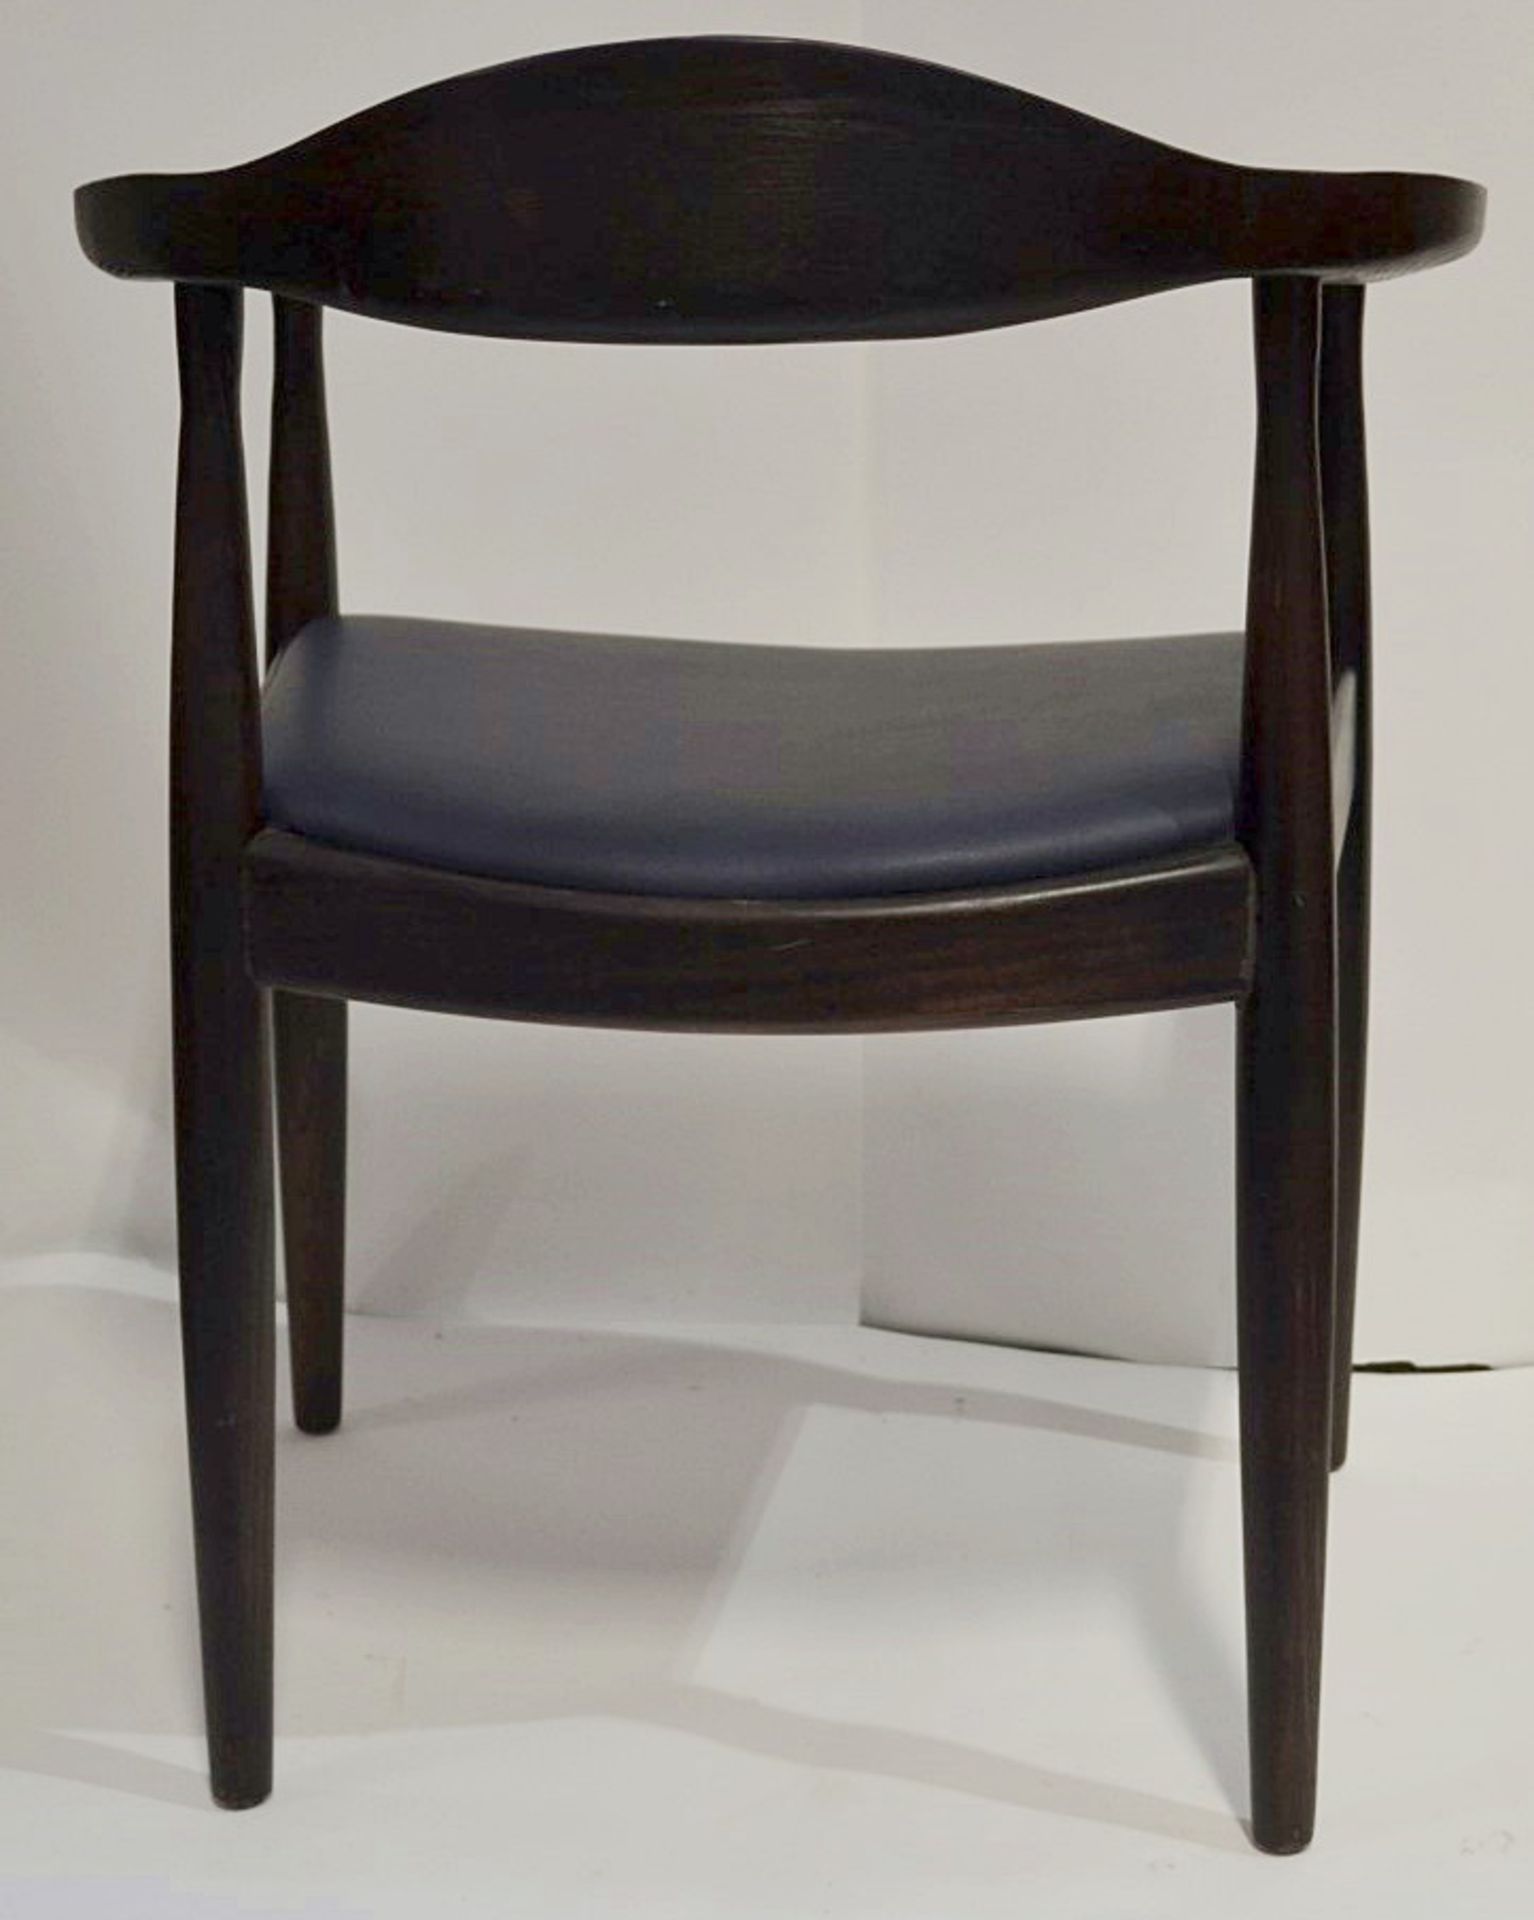 4 x Wooden Restaurant Dining Chairs - Ash Wood Dining Chairs With Dark Finish and Leather - Image 3 of 4